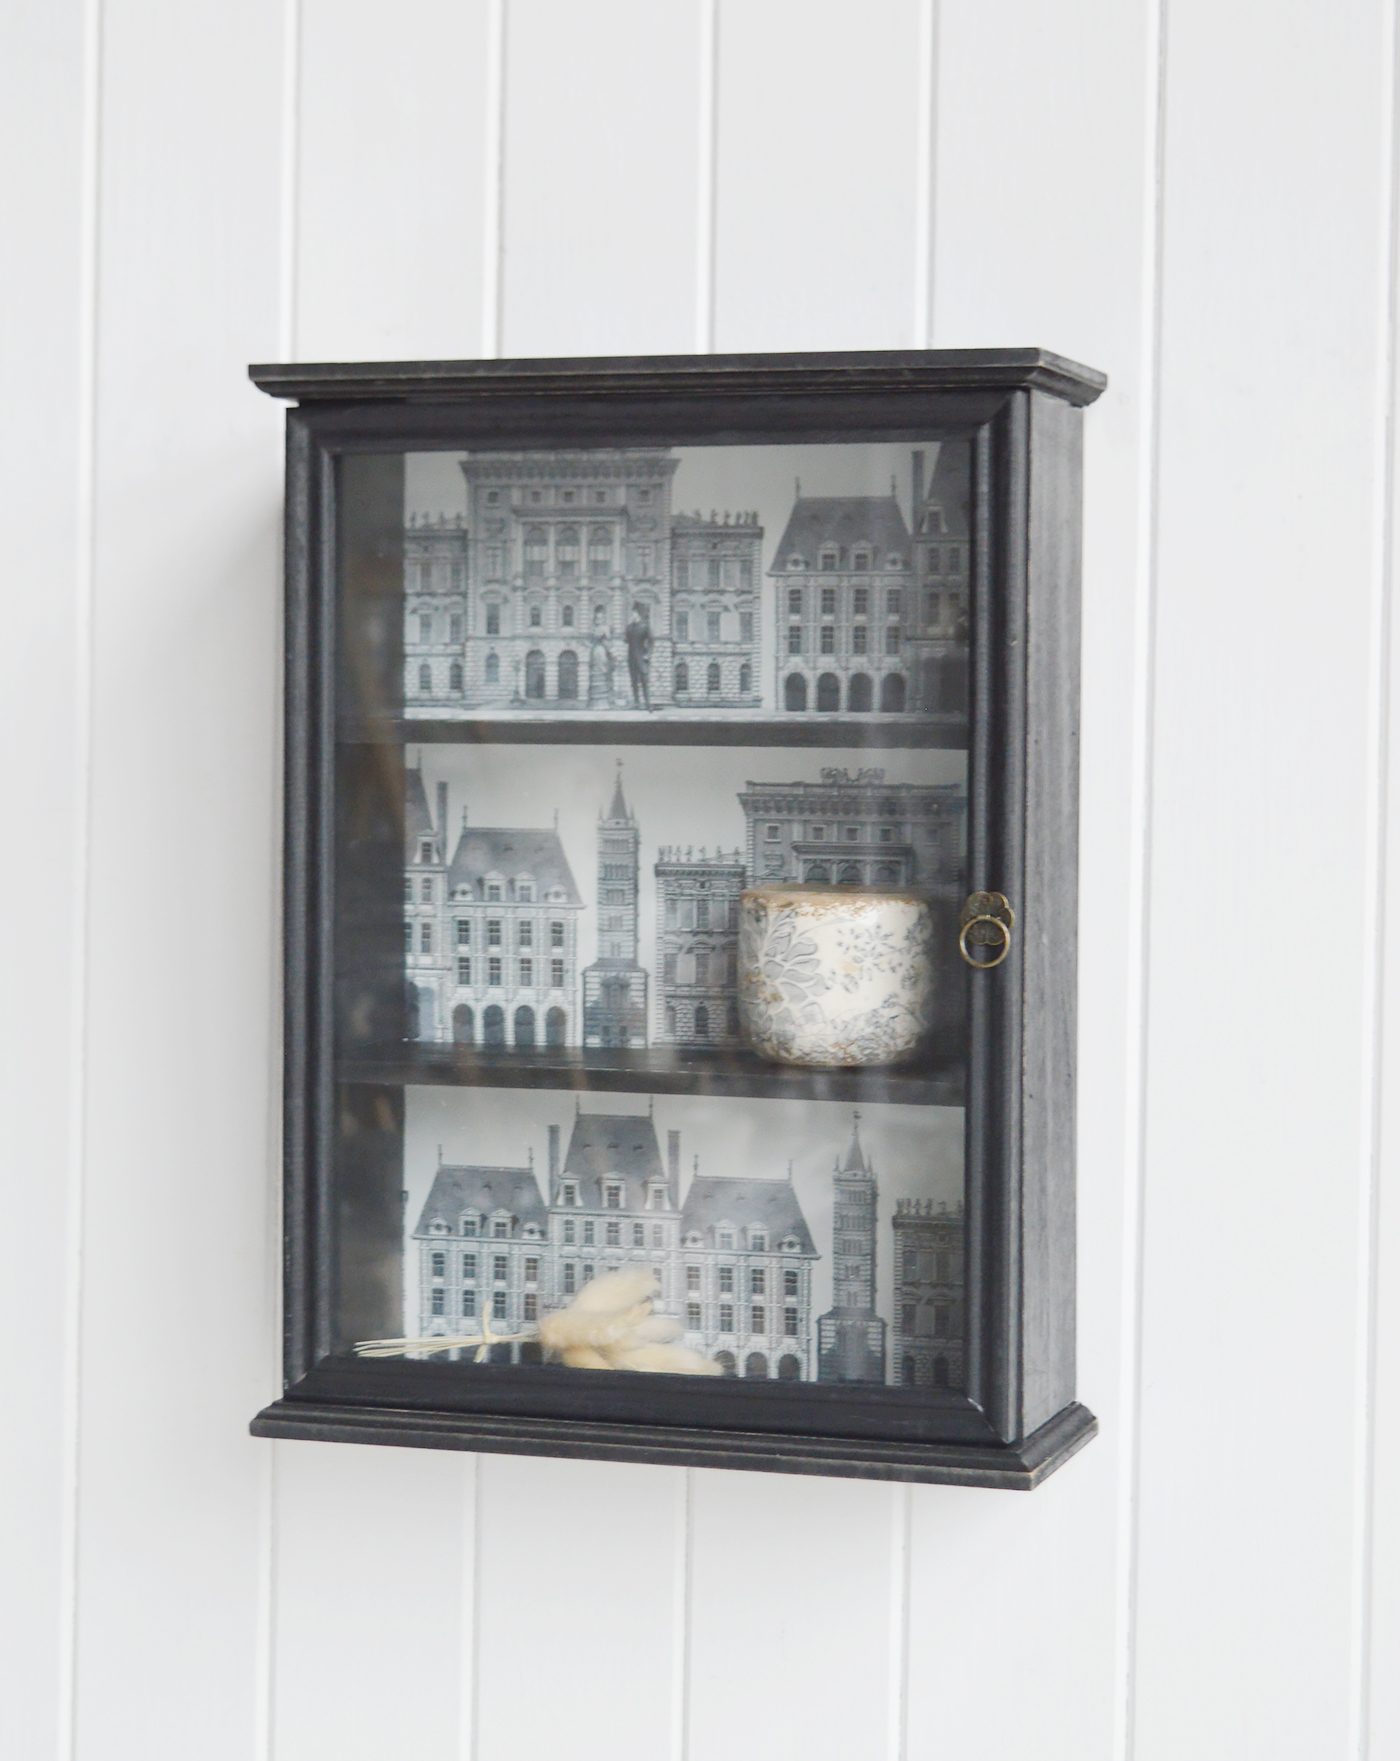 Beacon Hill Wall Cabinet - New England Furniture for coastal, country and modern farmhouse styled homes and interiors